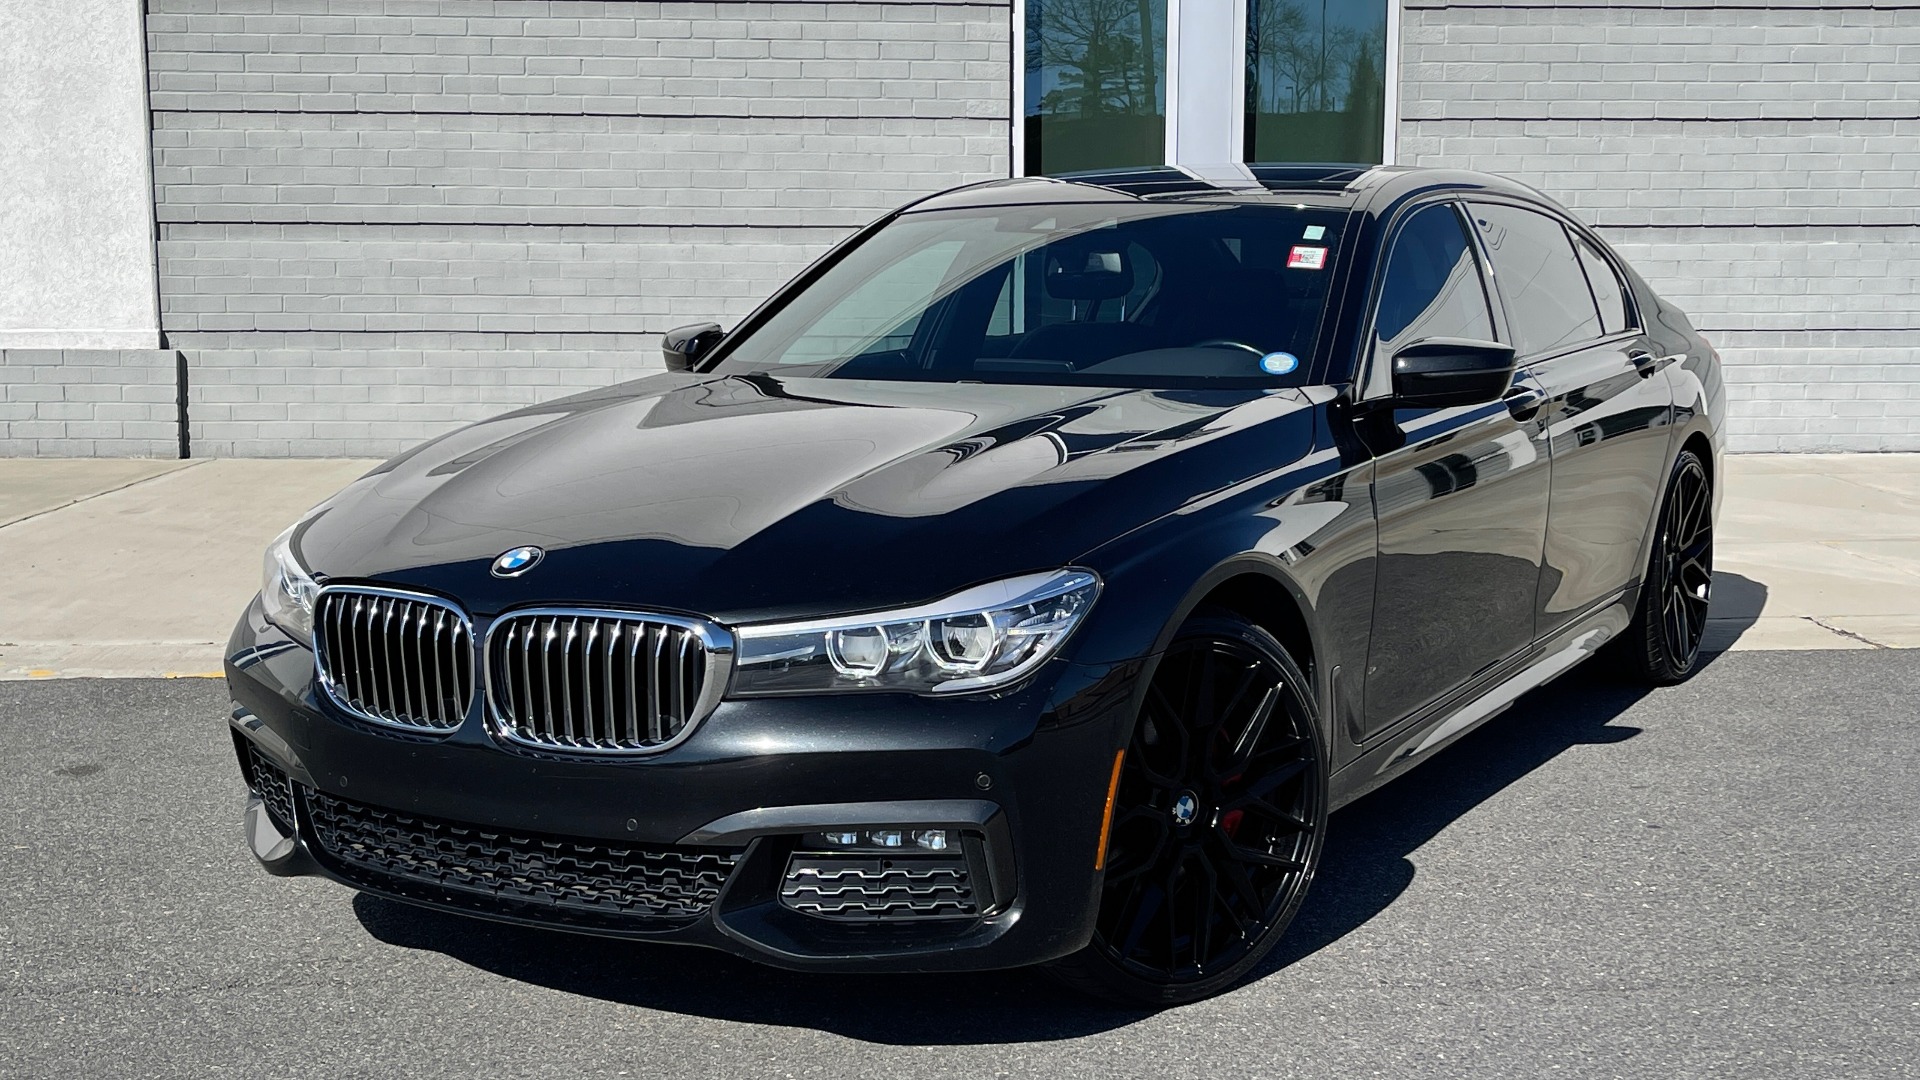 Used 2019 BMW 7 SERIES 740I XDRIVE M-SPORT / CLD WTHR / NAV / SUNROOF / REARVIEW / 22IN WHLS for sale Sold at Formula Imports in Charlotte NC 28227 1